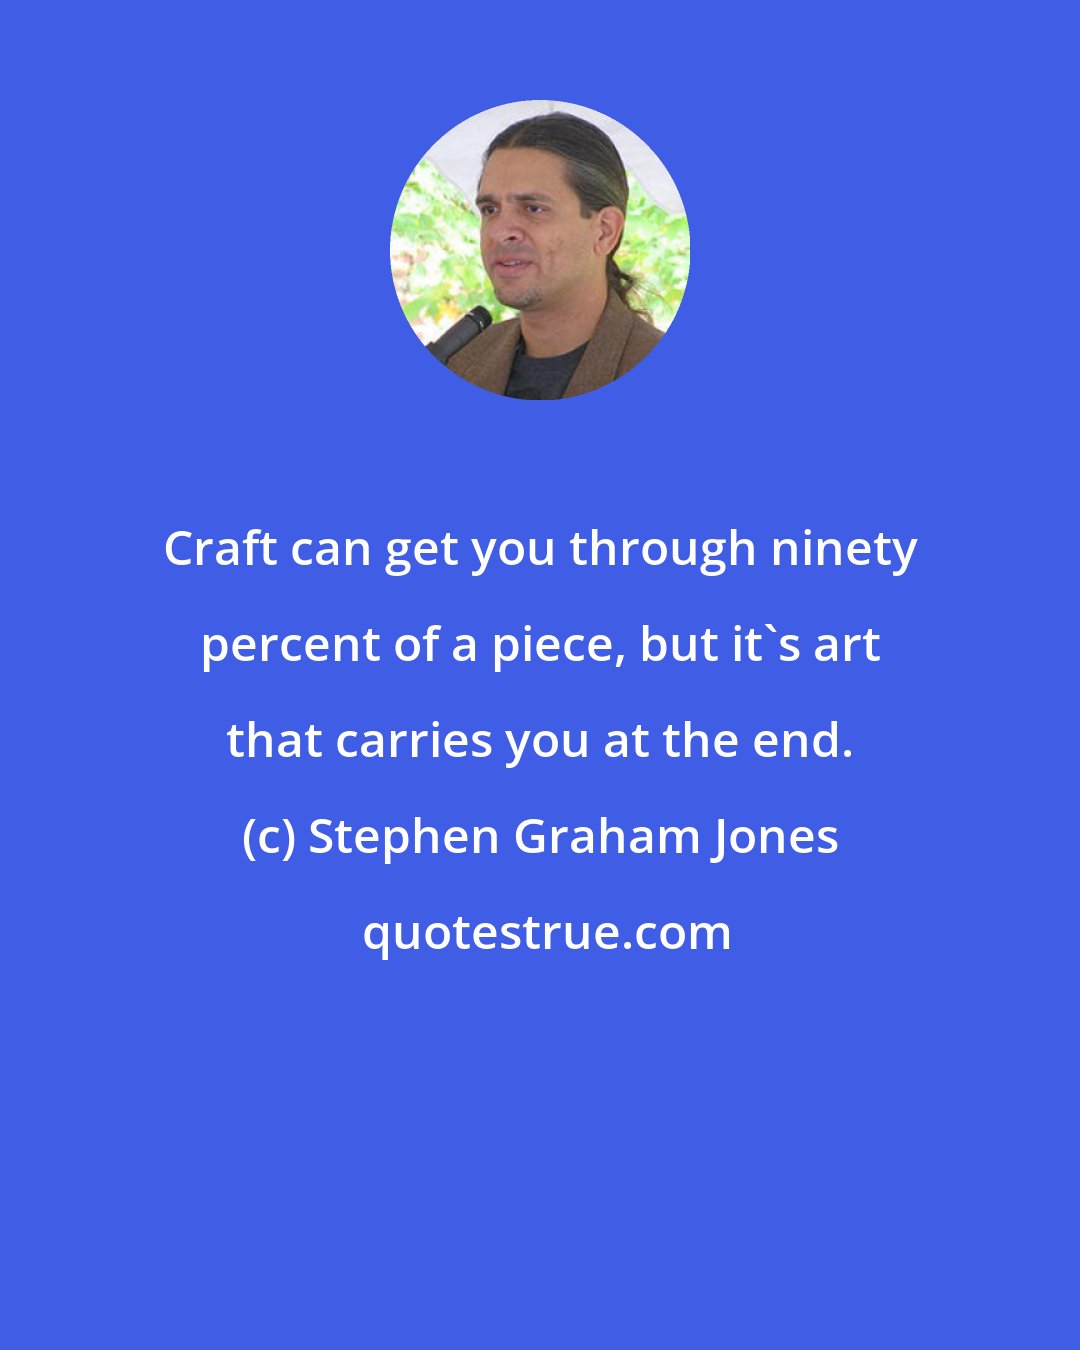 Stephen Graham Jones: Craft can get you through ninety percent of a piece, but it's art that carries you at the end.